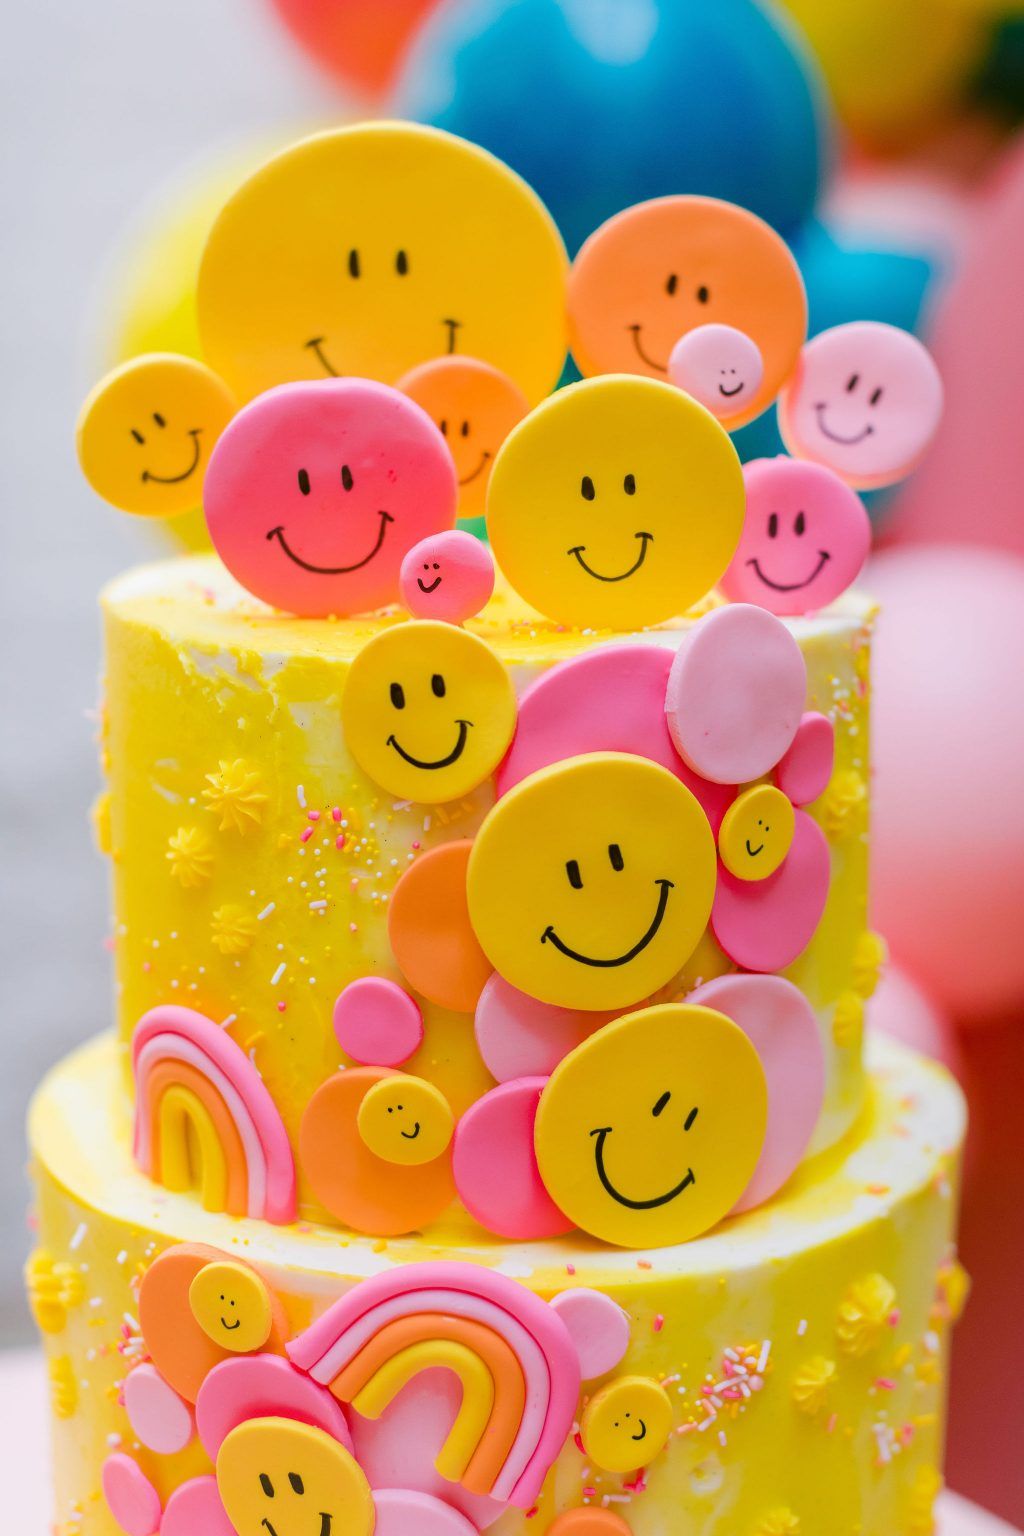 The Happiest Smiley Face Party to Brighten Your DayHD Wallpaper